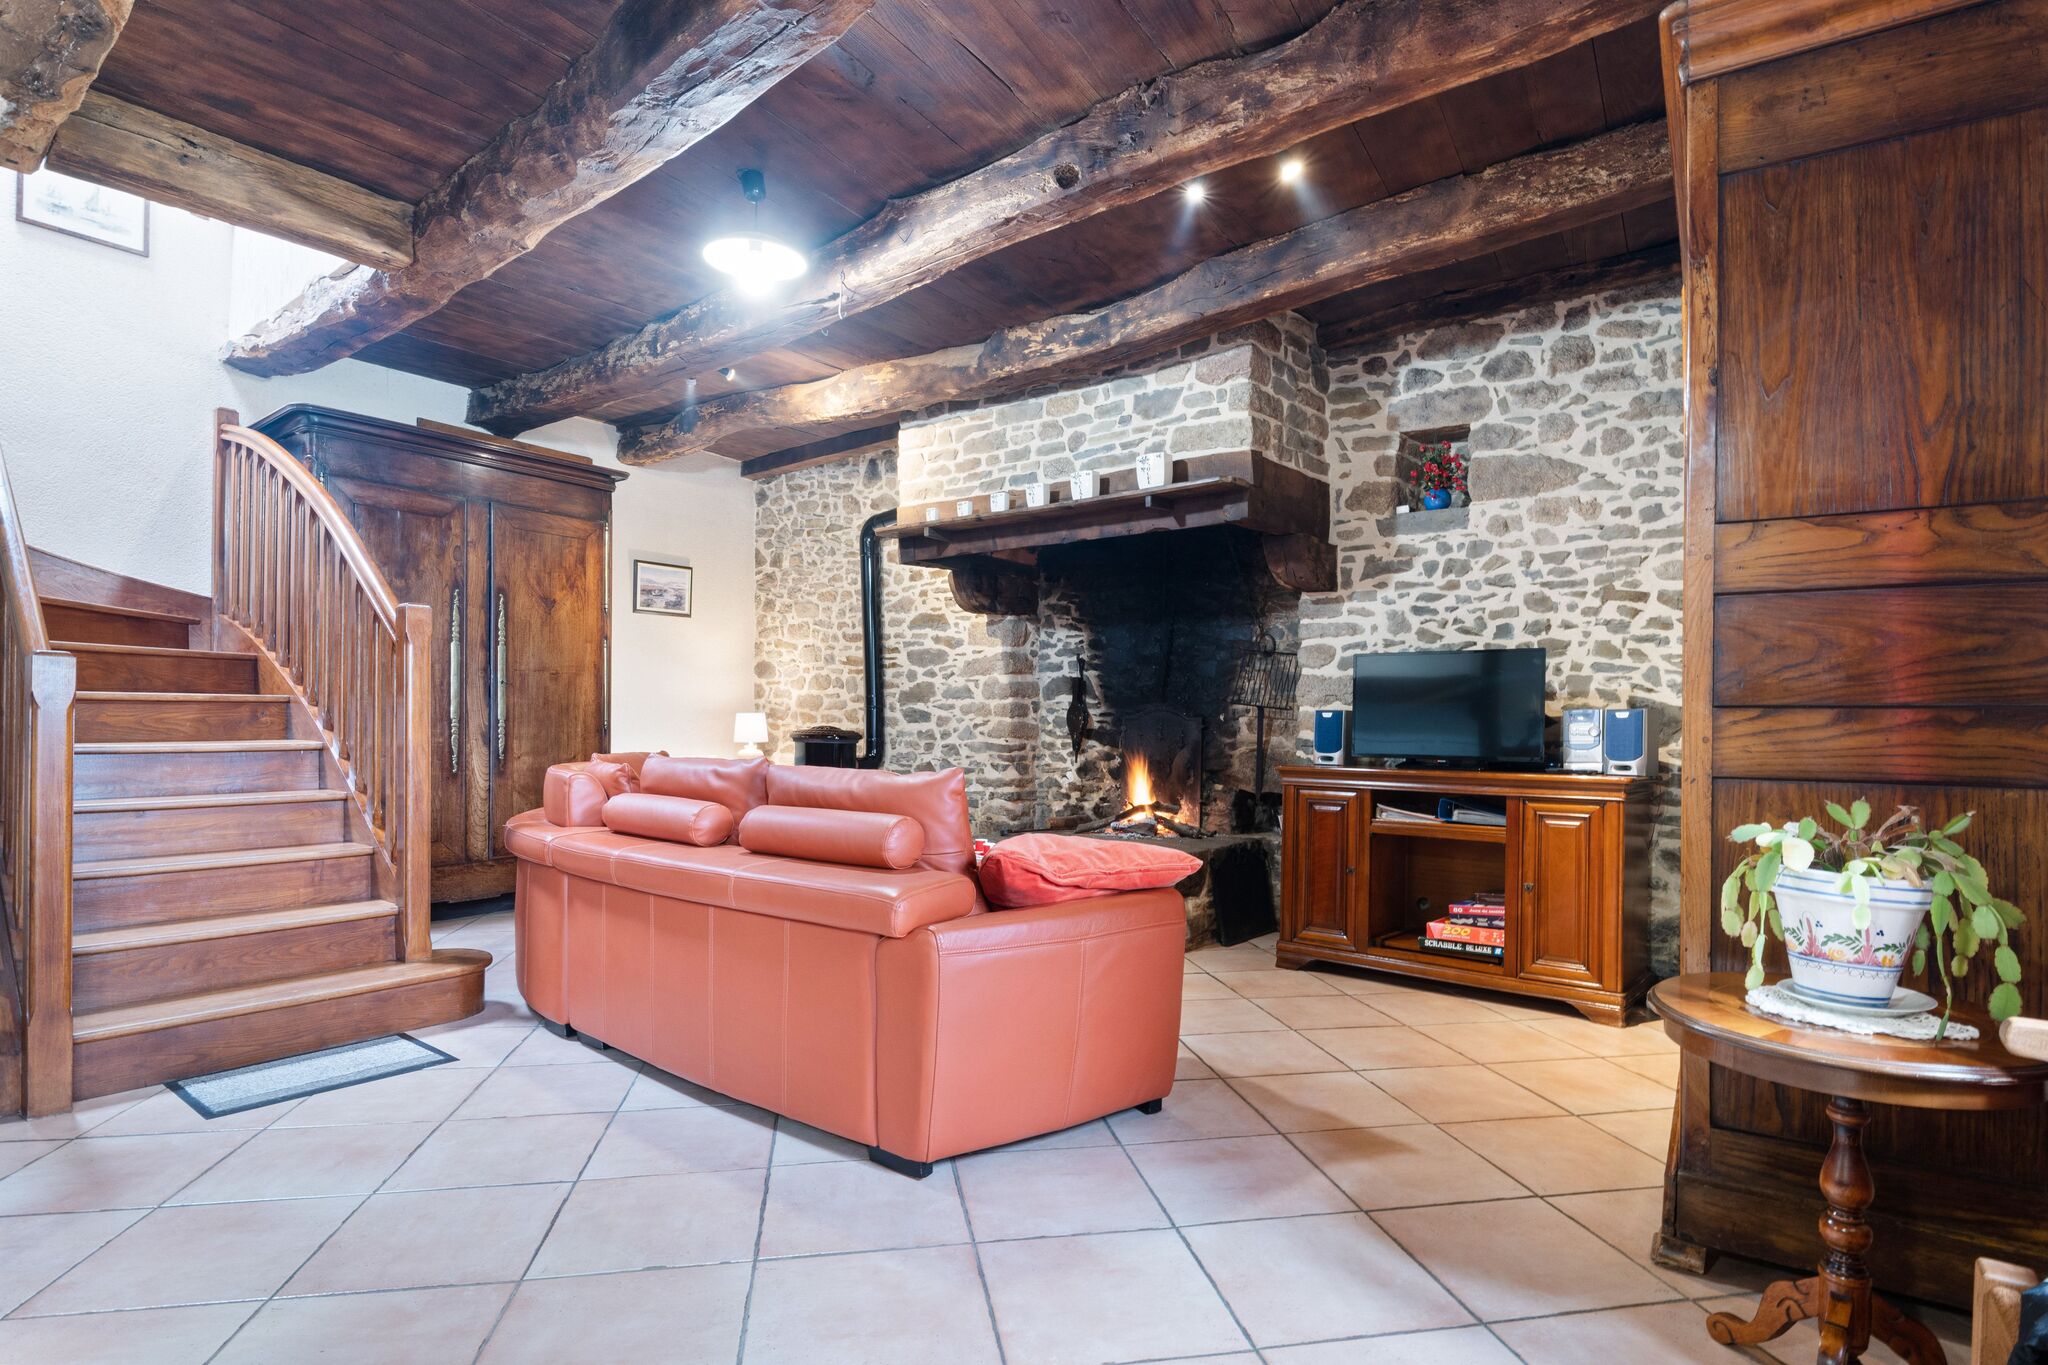 Beautiful Breton house near the sea and just 20km from Mont Saint Michel!